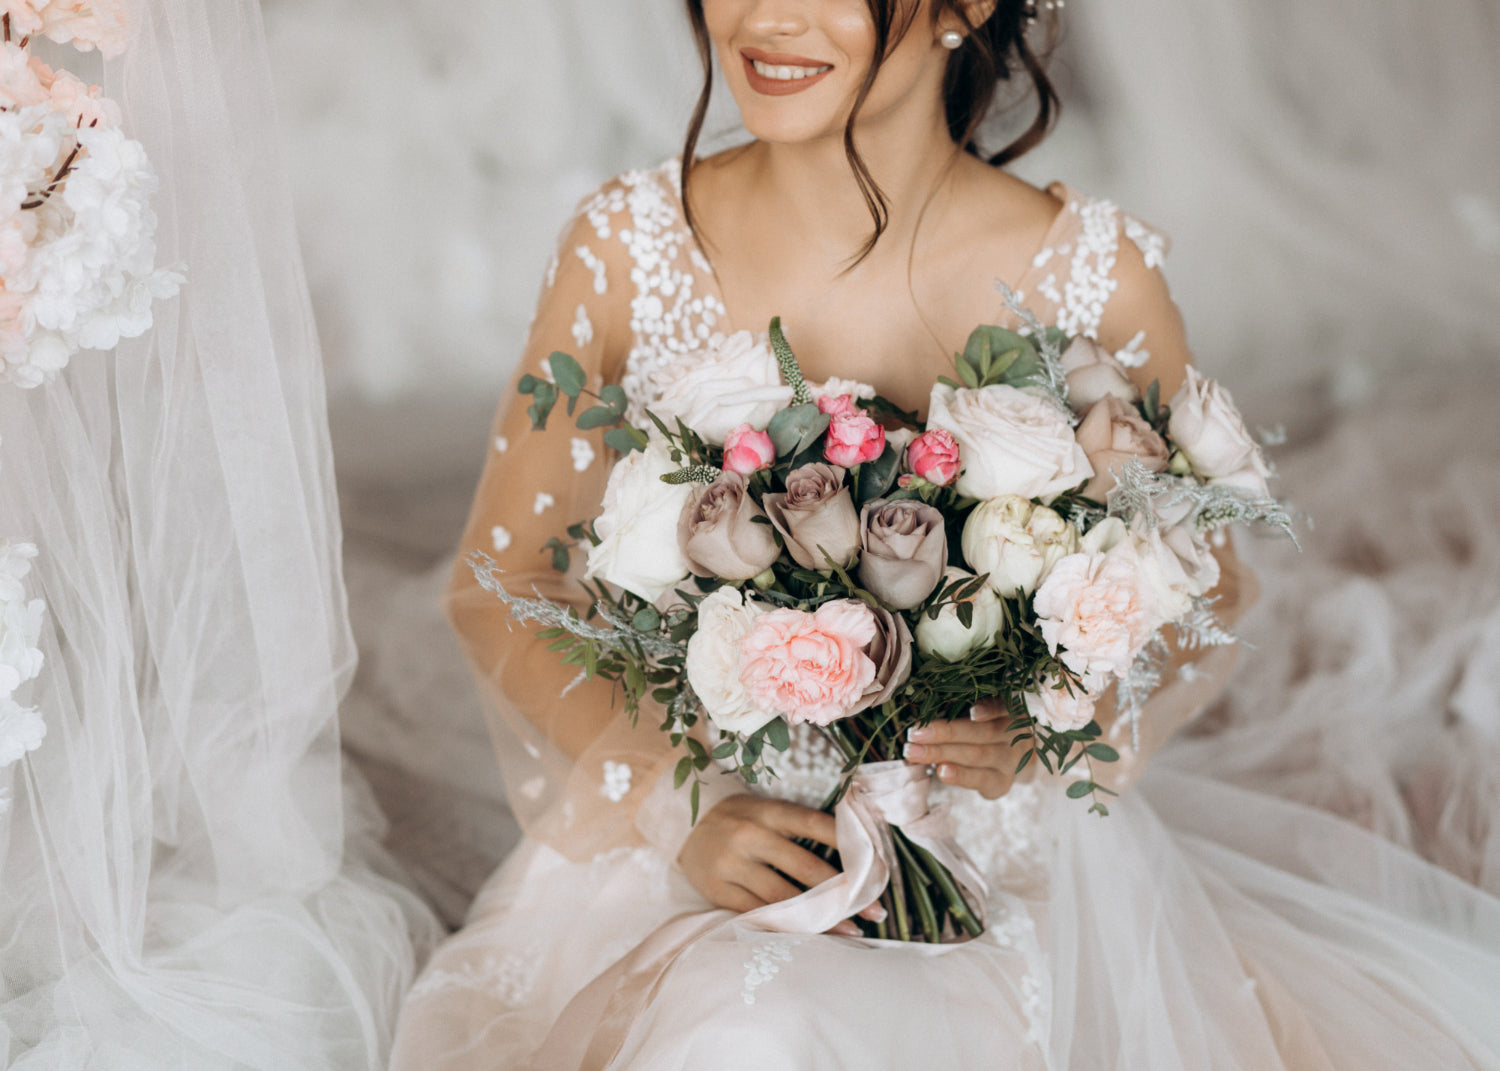 Ways to Re Purpose Your Wedding Gown and Veil After The Wedding